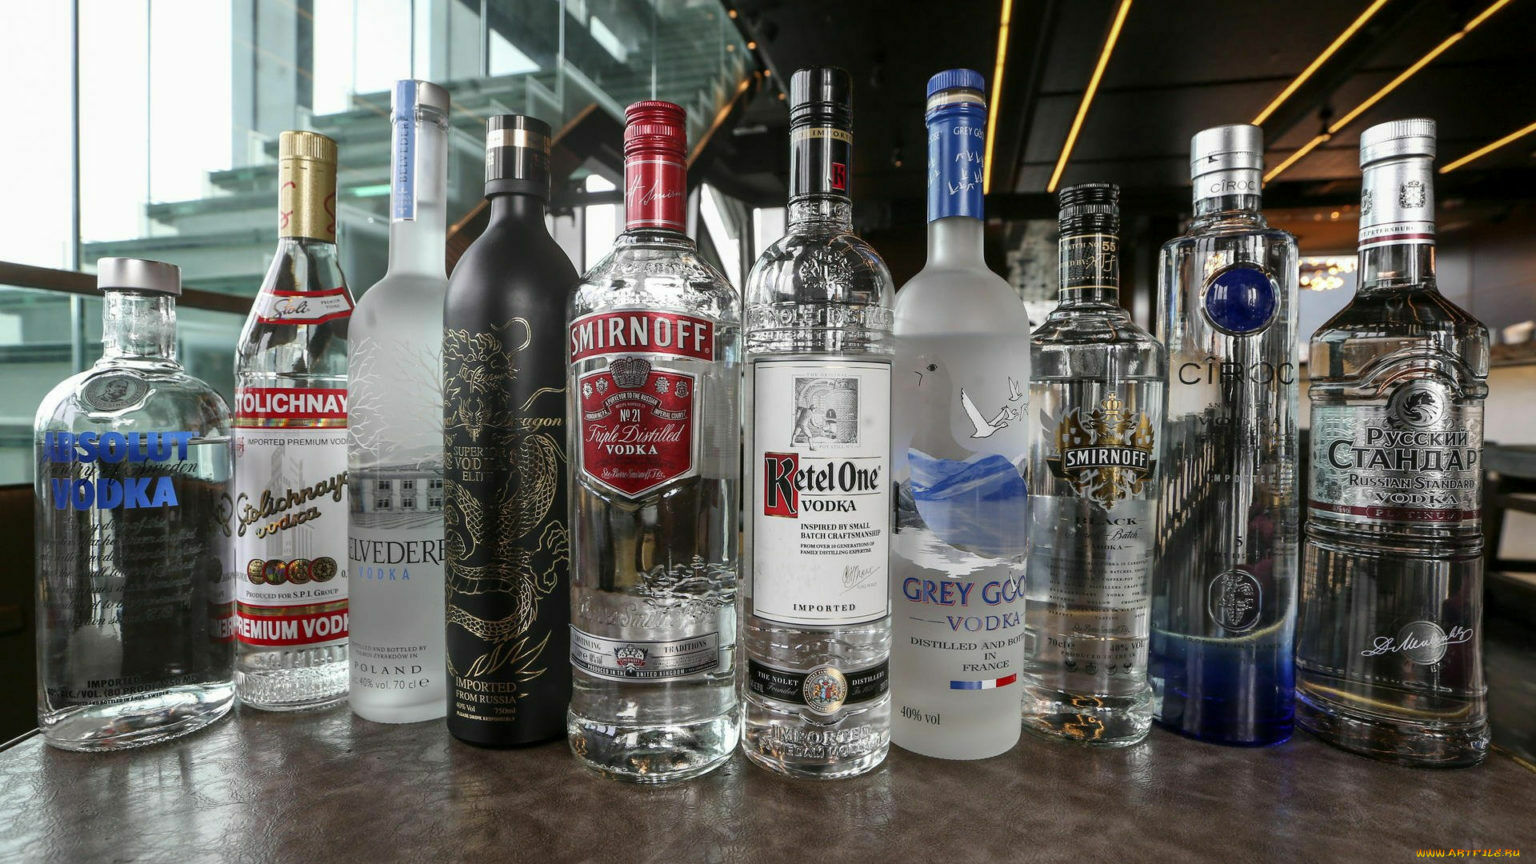 The Ministry of Finance proposes to raise prices for vodka from January 1